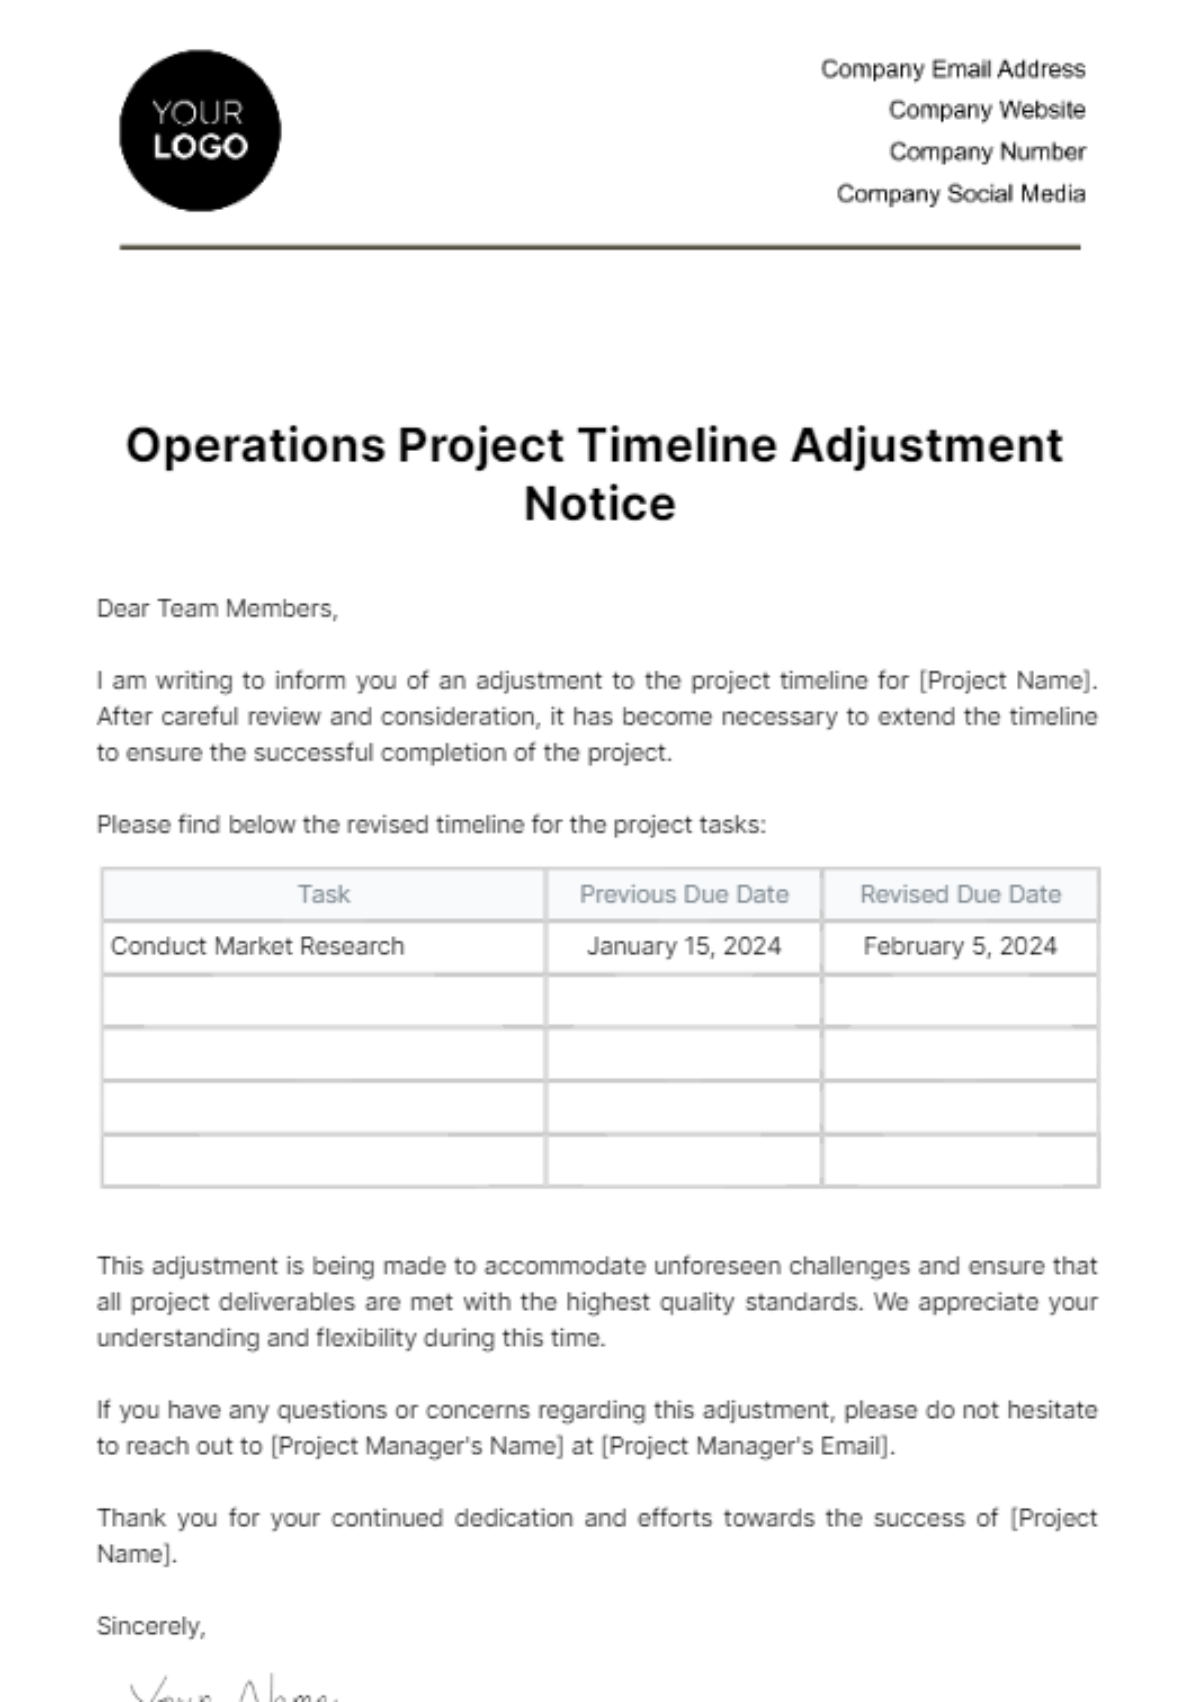 Operations Project Timeline Adjustment Notice Template